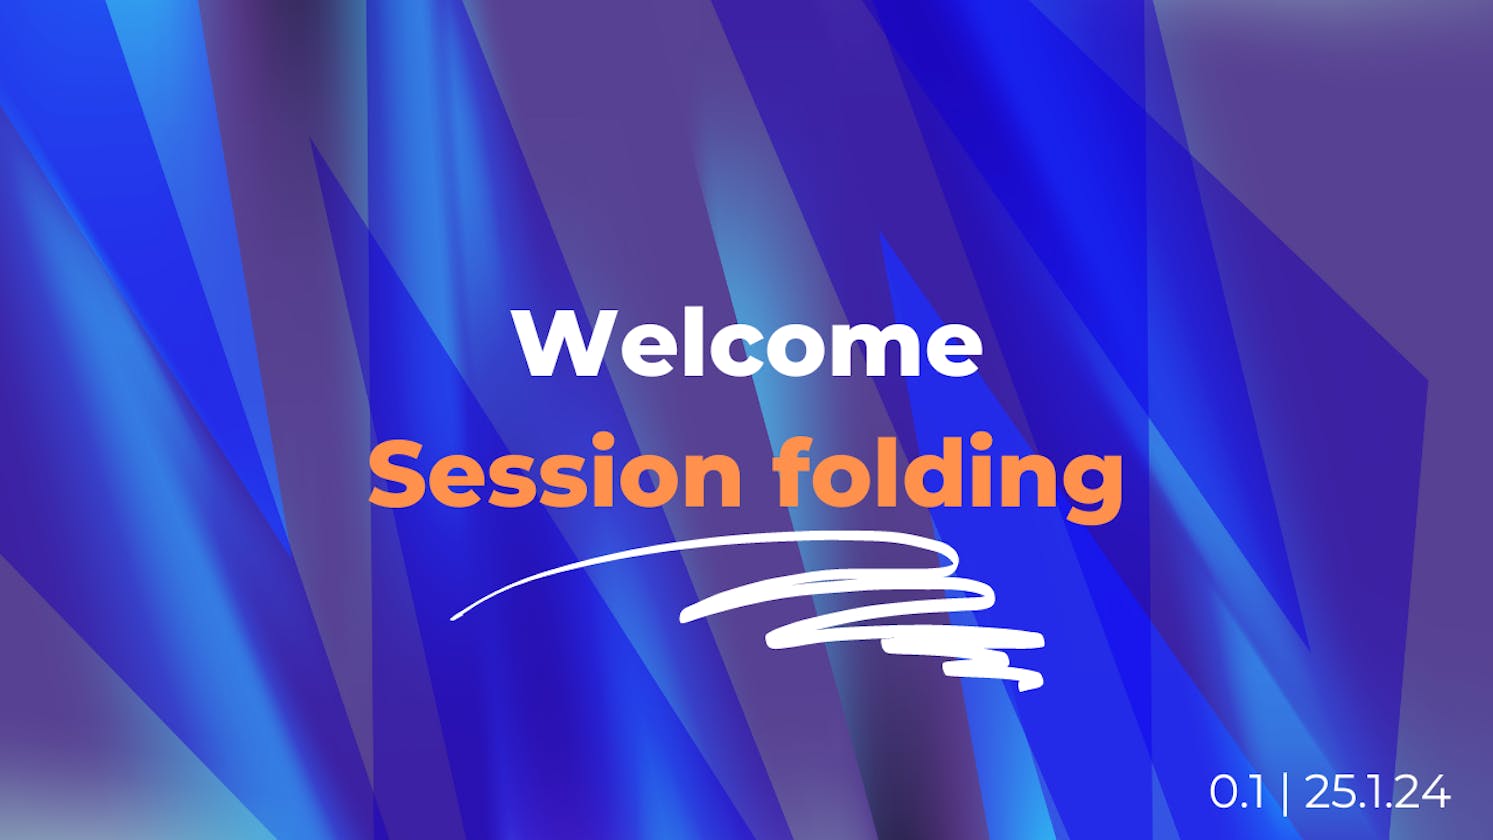 Welcome Sessions folding